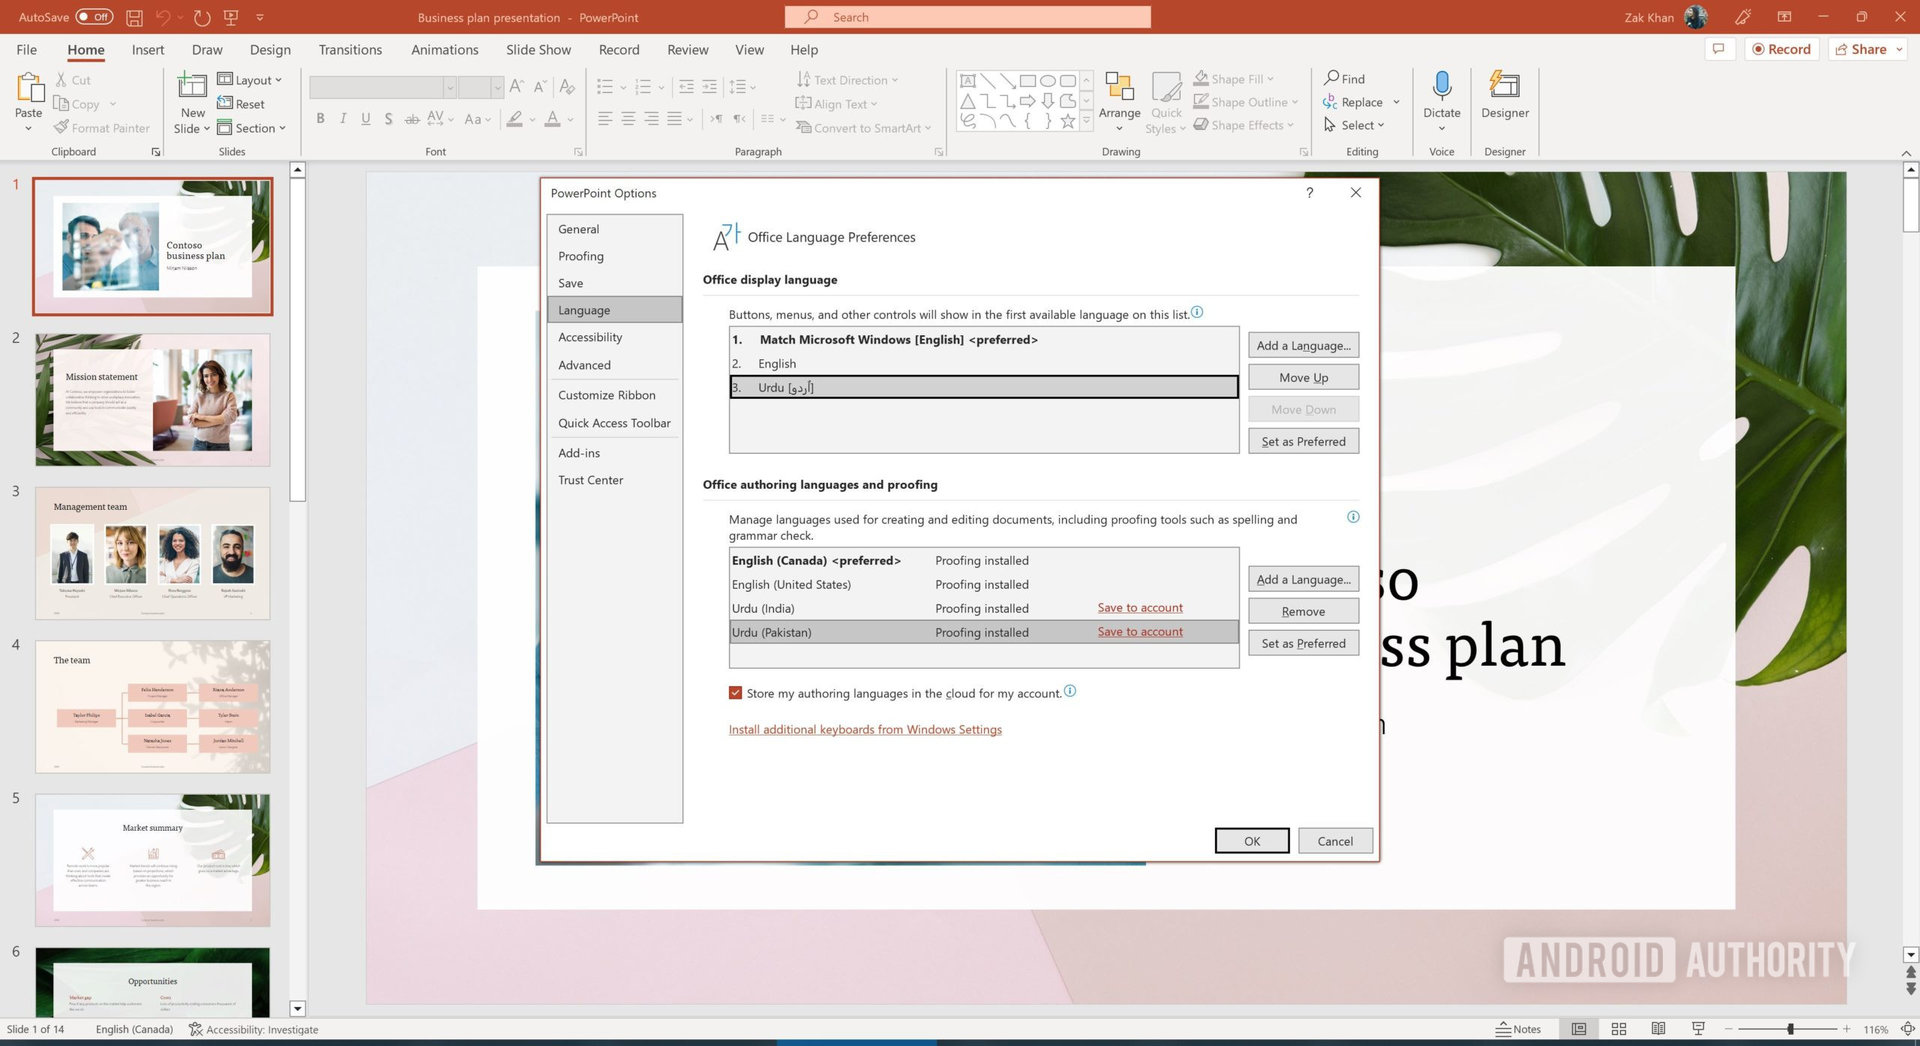 A screenshot of the PowerPoint settings window showing the available options to change the language of the UI and the spell checking feature.